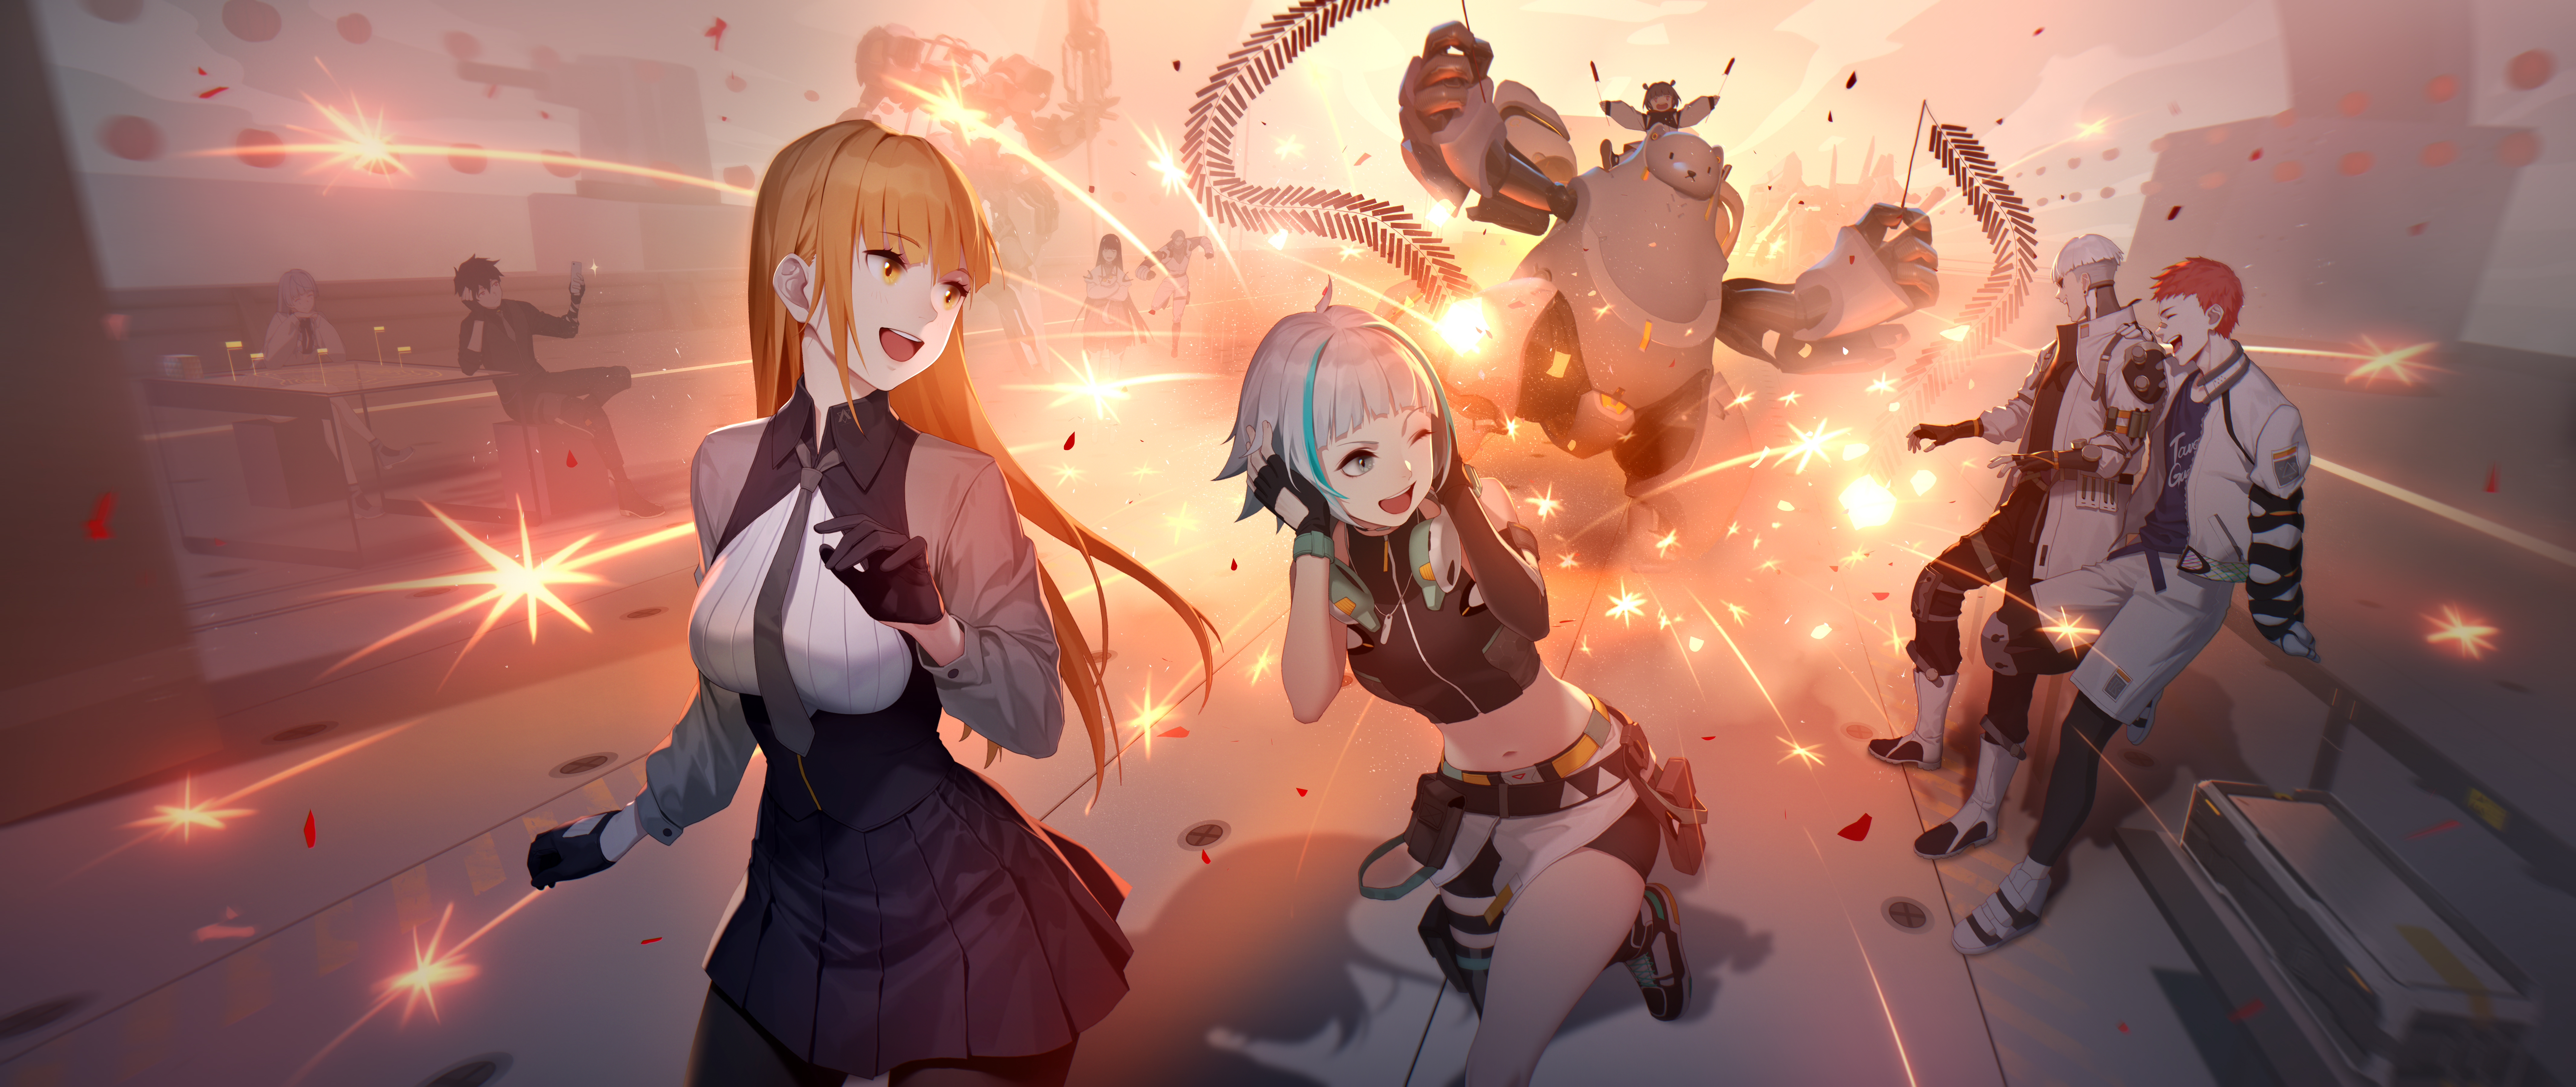 Final Front Enobetta Video Games Video Game Characters Anime Girls Anime Boys Robot Fireworks Sparks 8533x3600